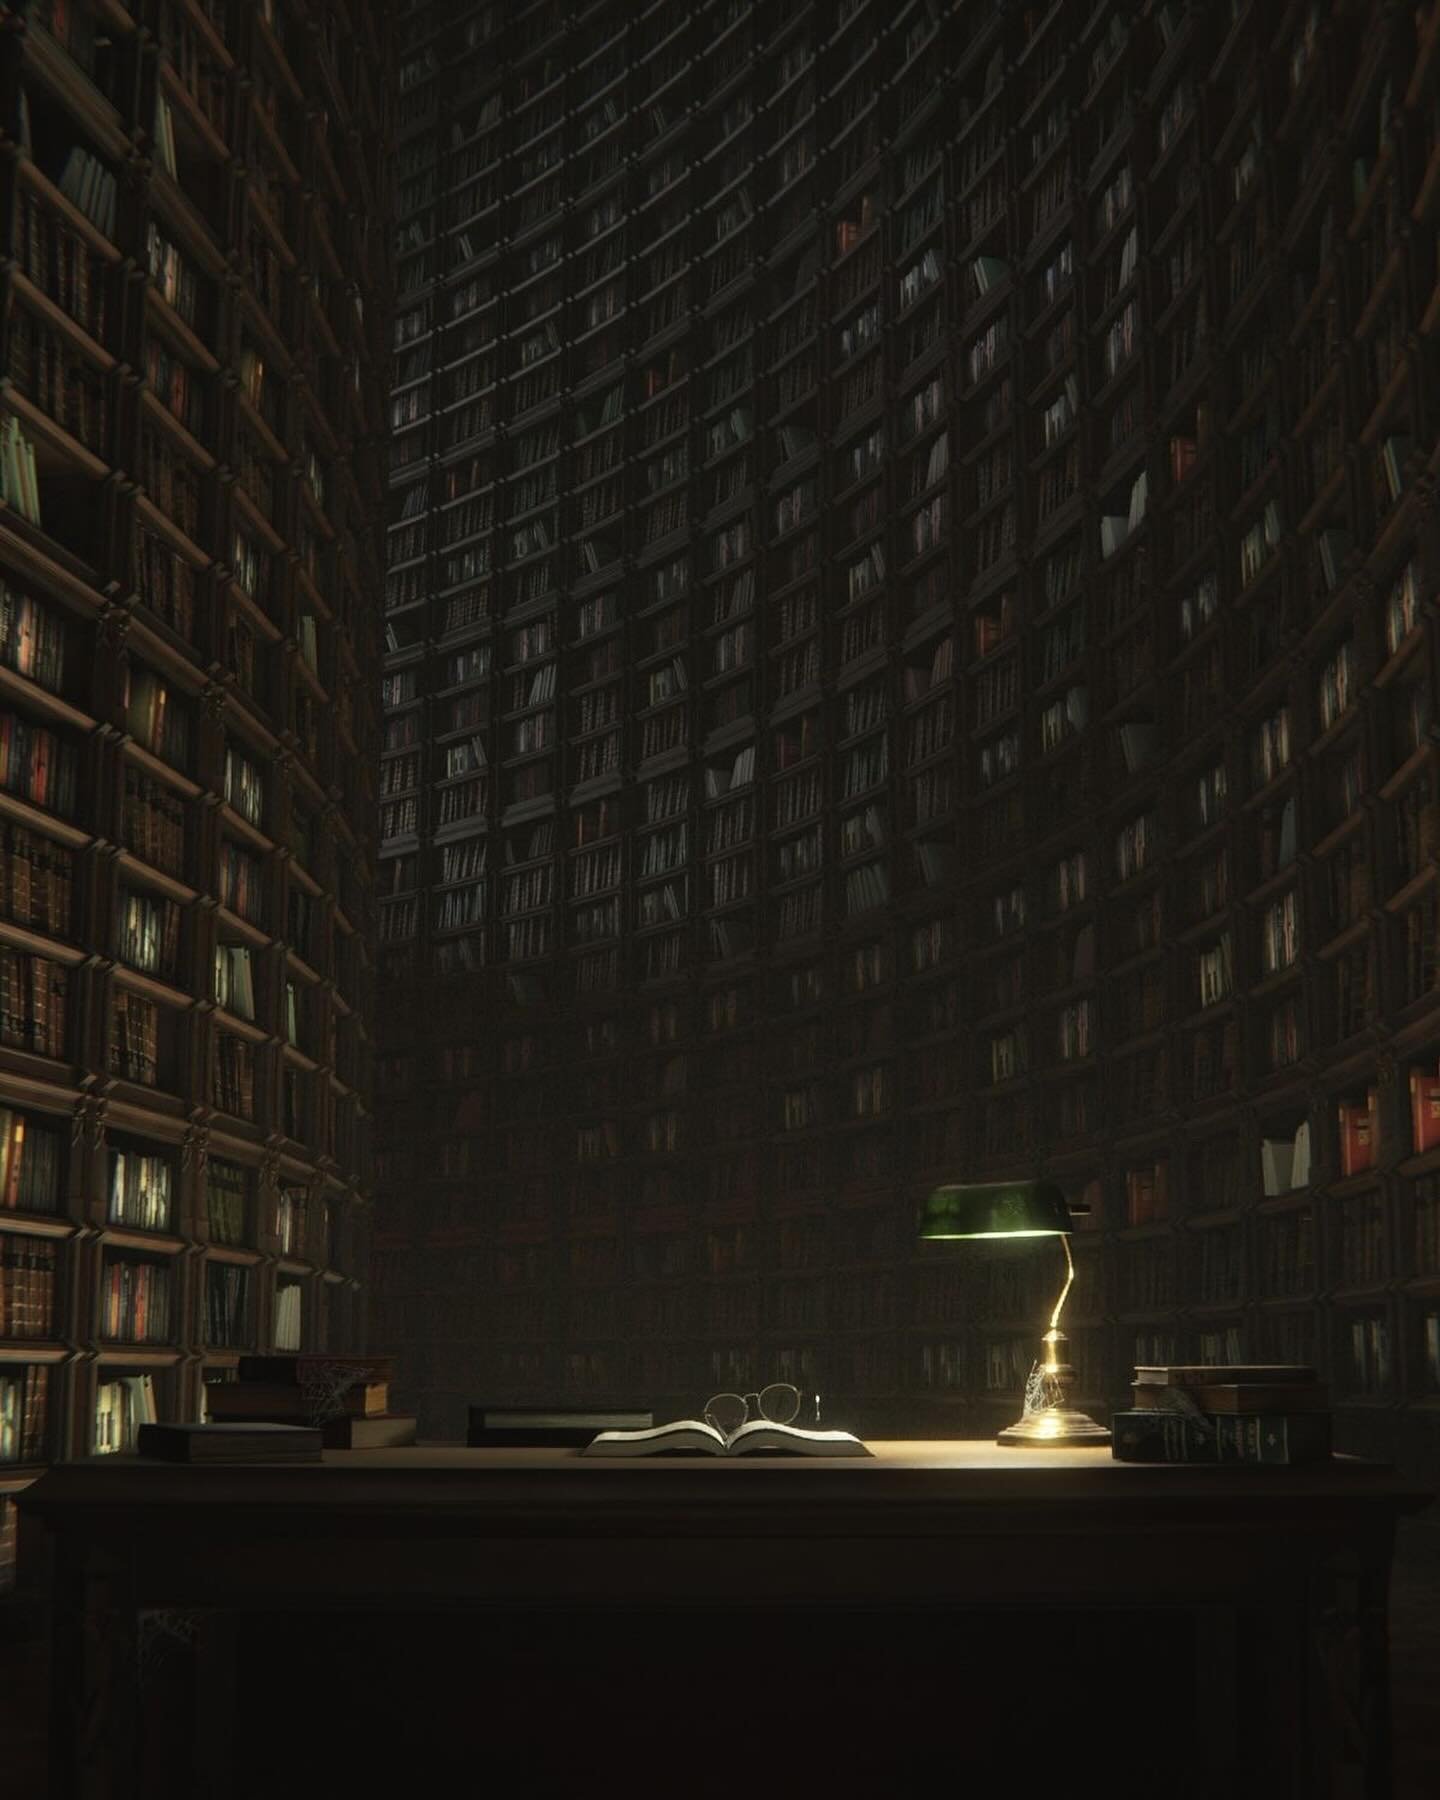 How is everyone enjoying the midnight library? Does anyone have an alternative reality/life that they think about? 🤍